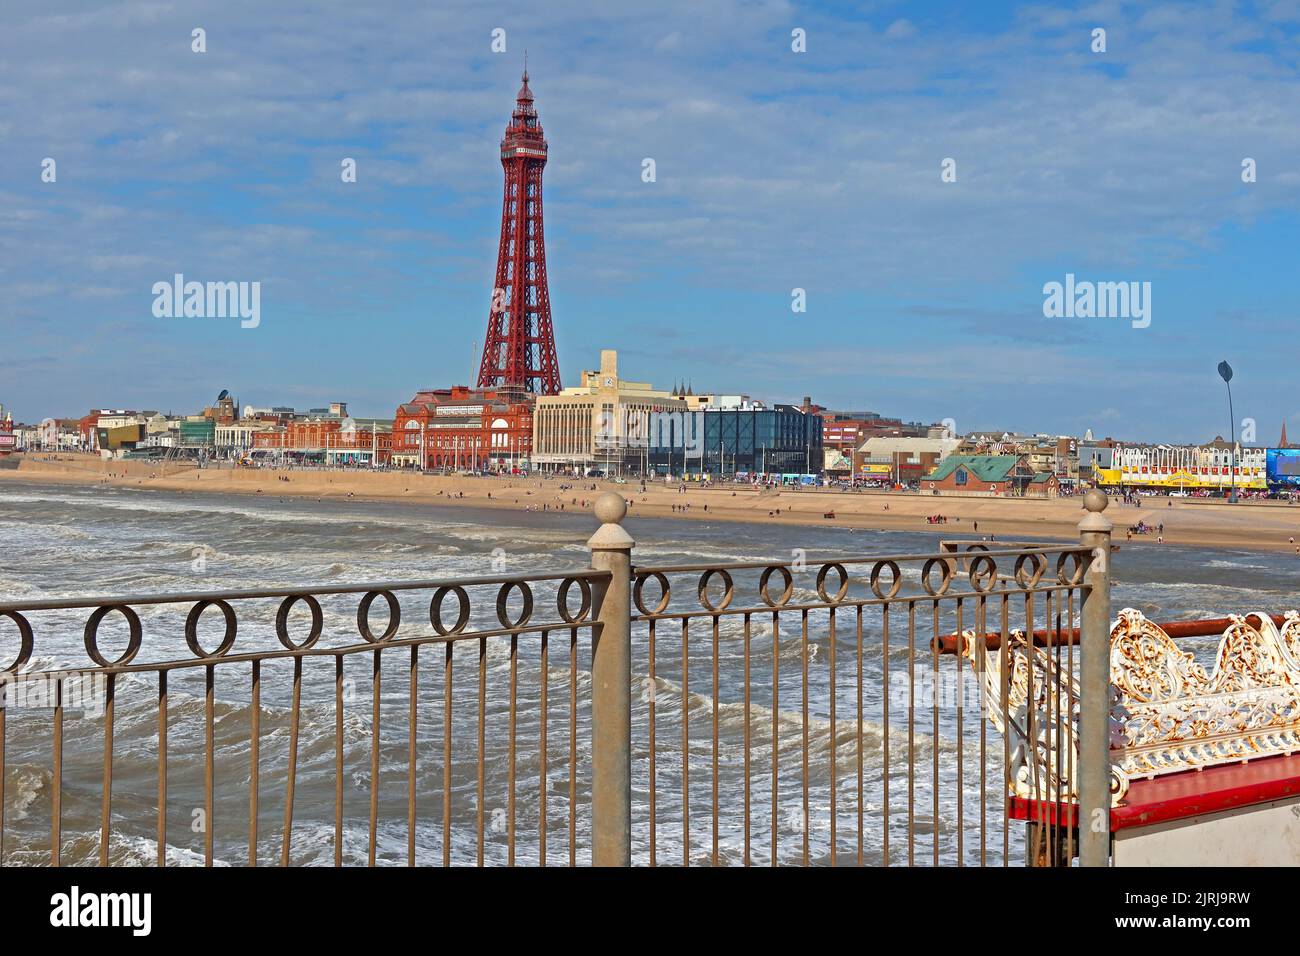 Blackpool Tower and promenade, viewed from Central Piers Victorian 1868  boardwalk,  Blackpool, Lancashire, England, UK, FY1 5BB Stock Photo